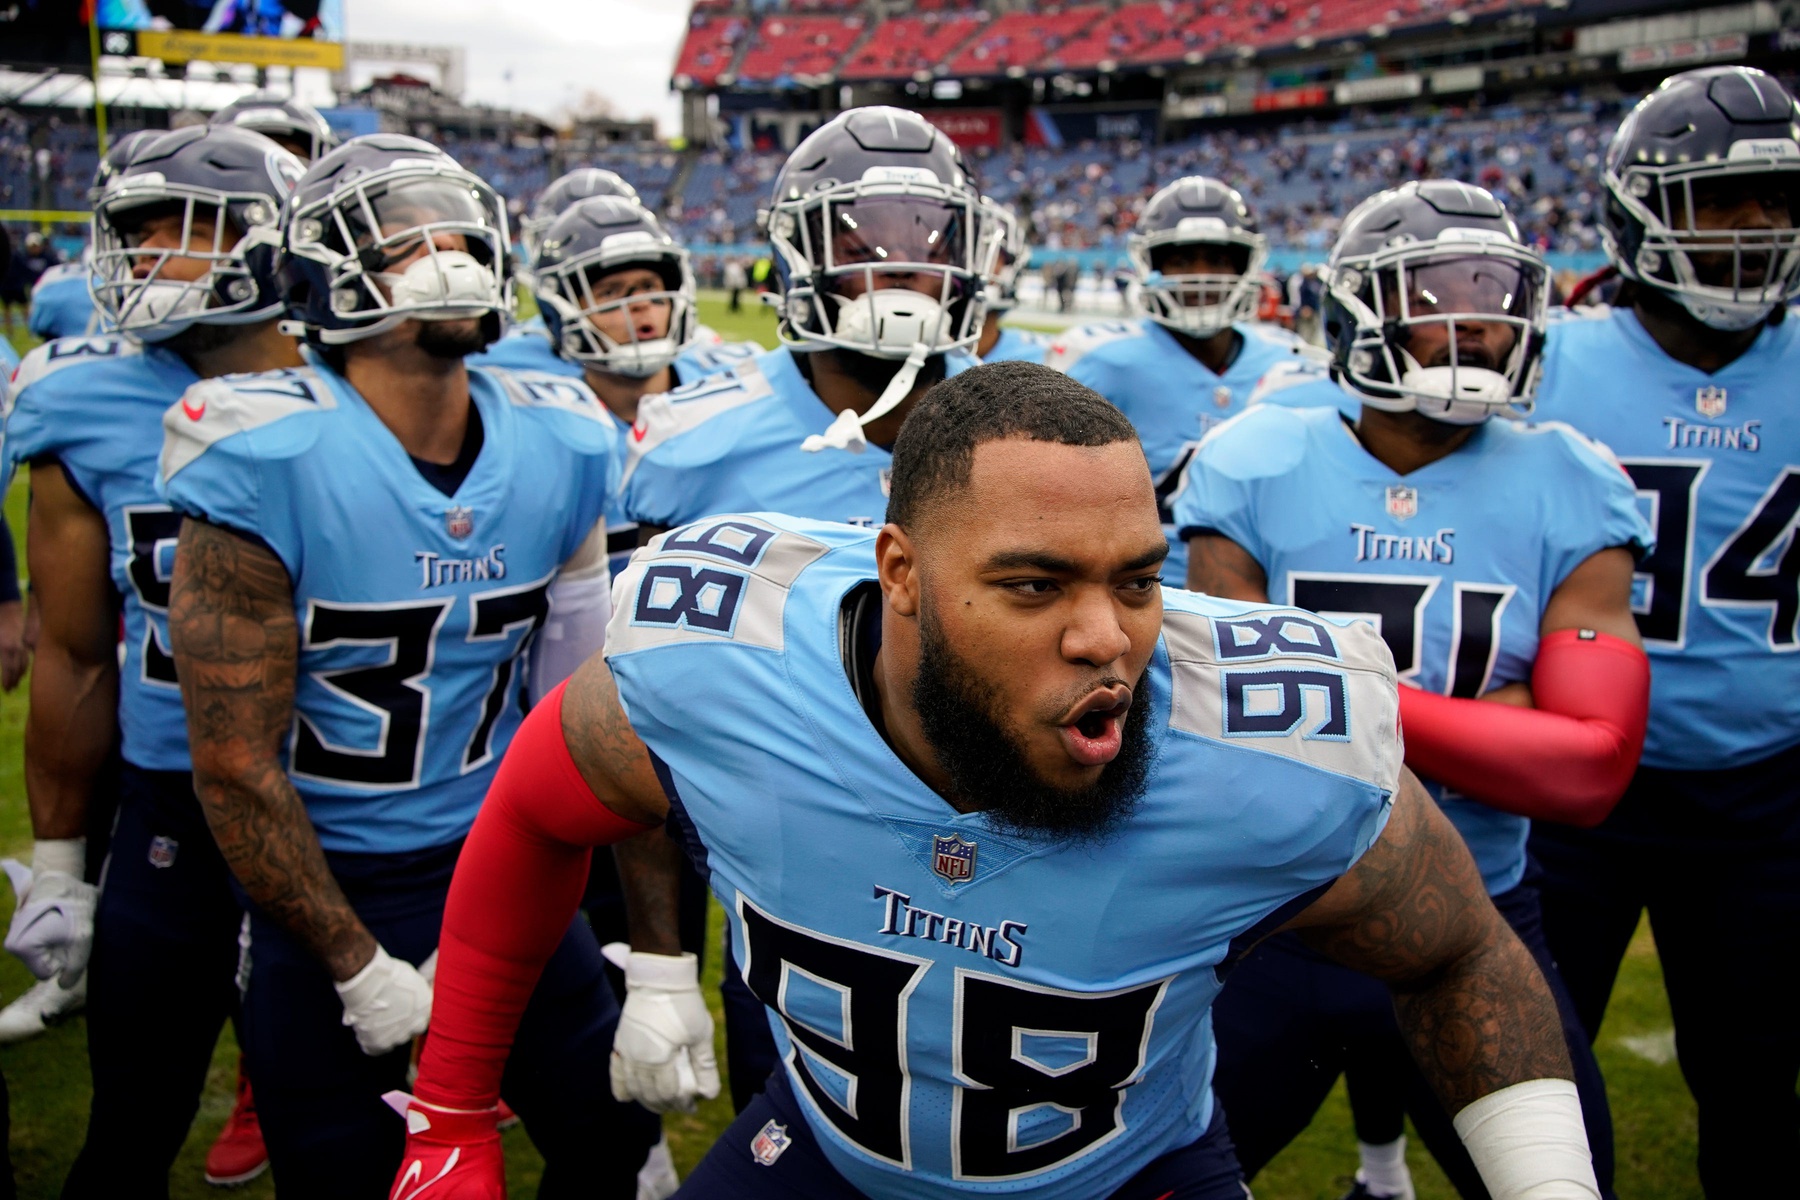 nfl games tennessee titans